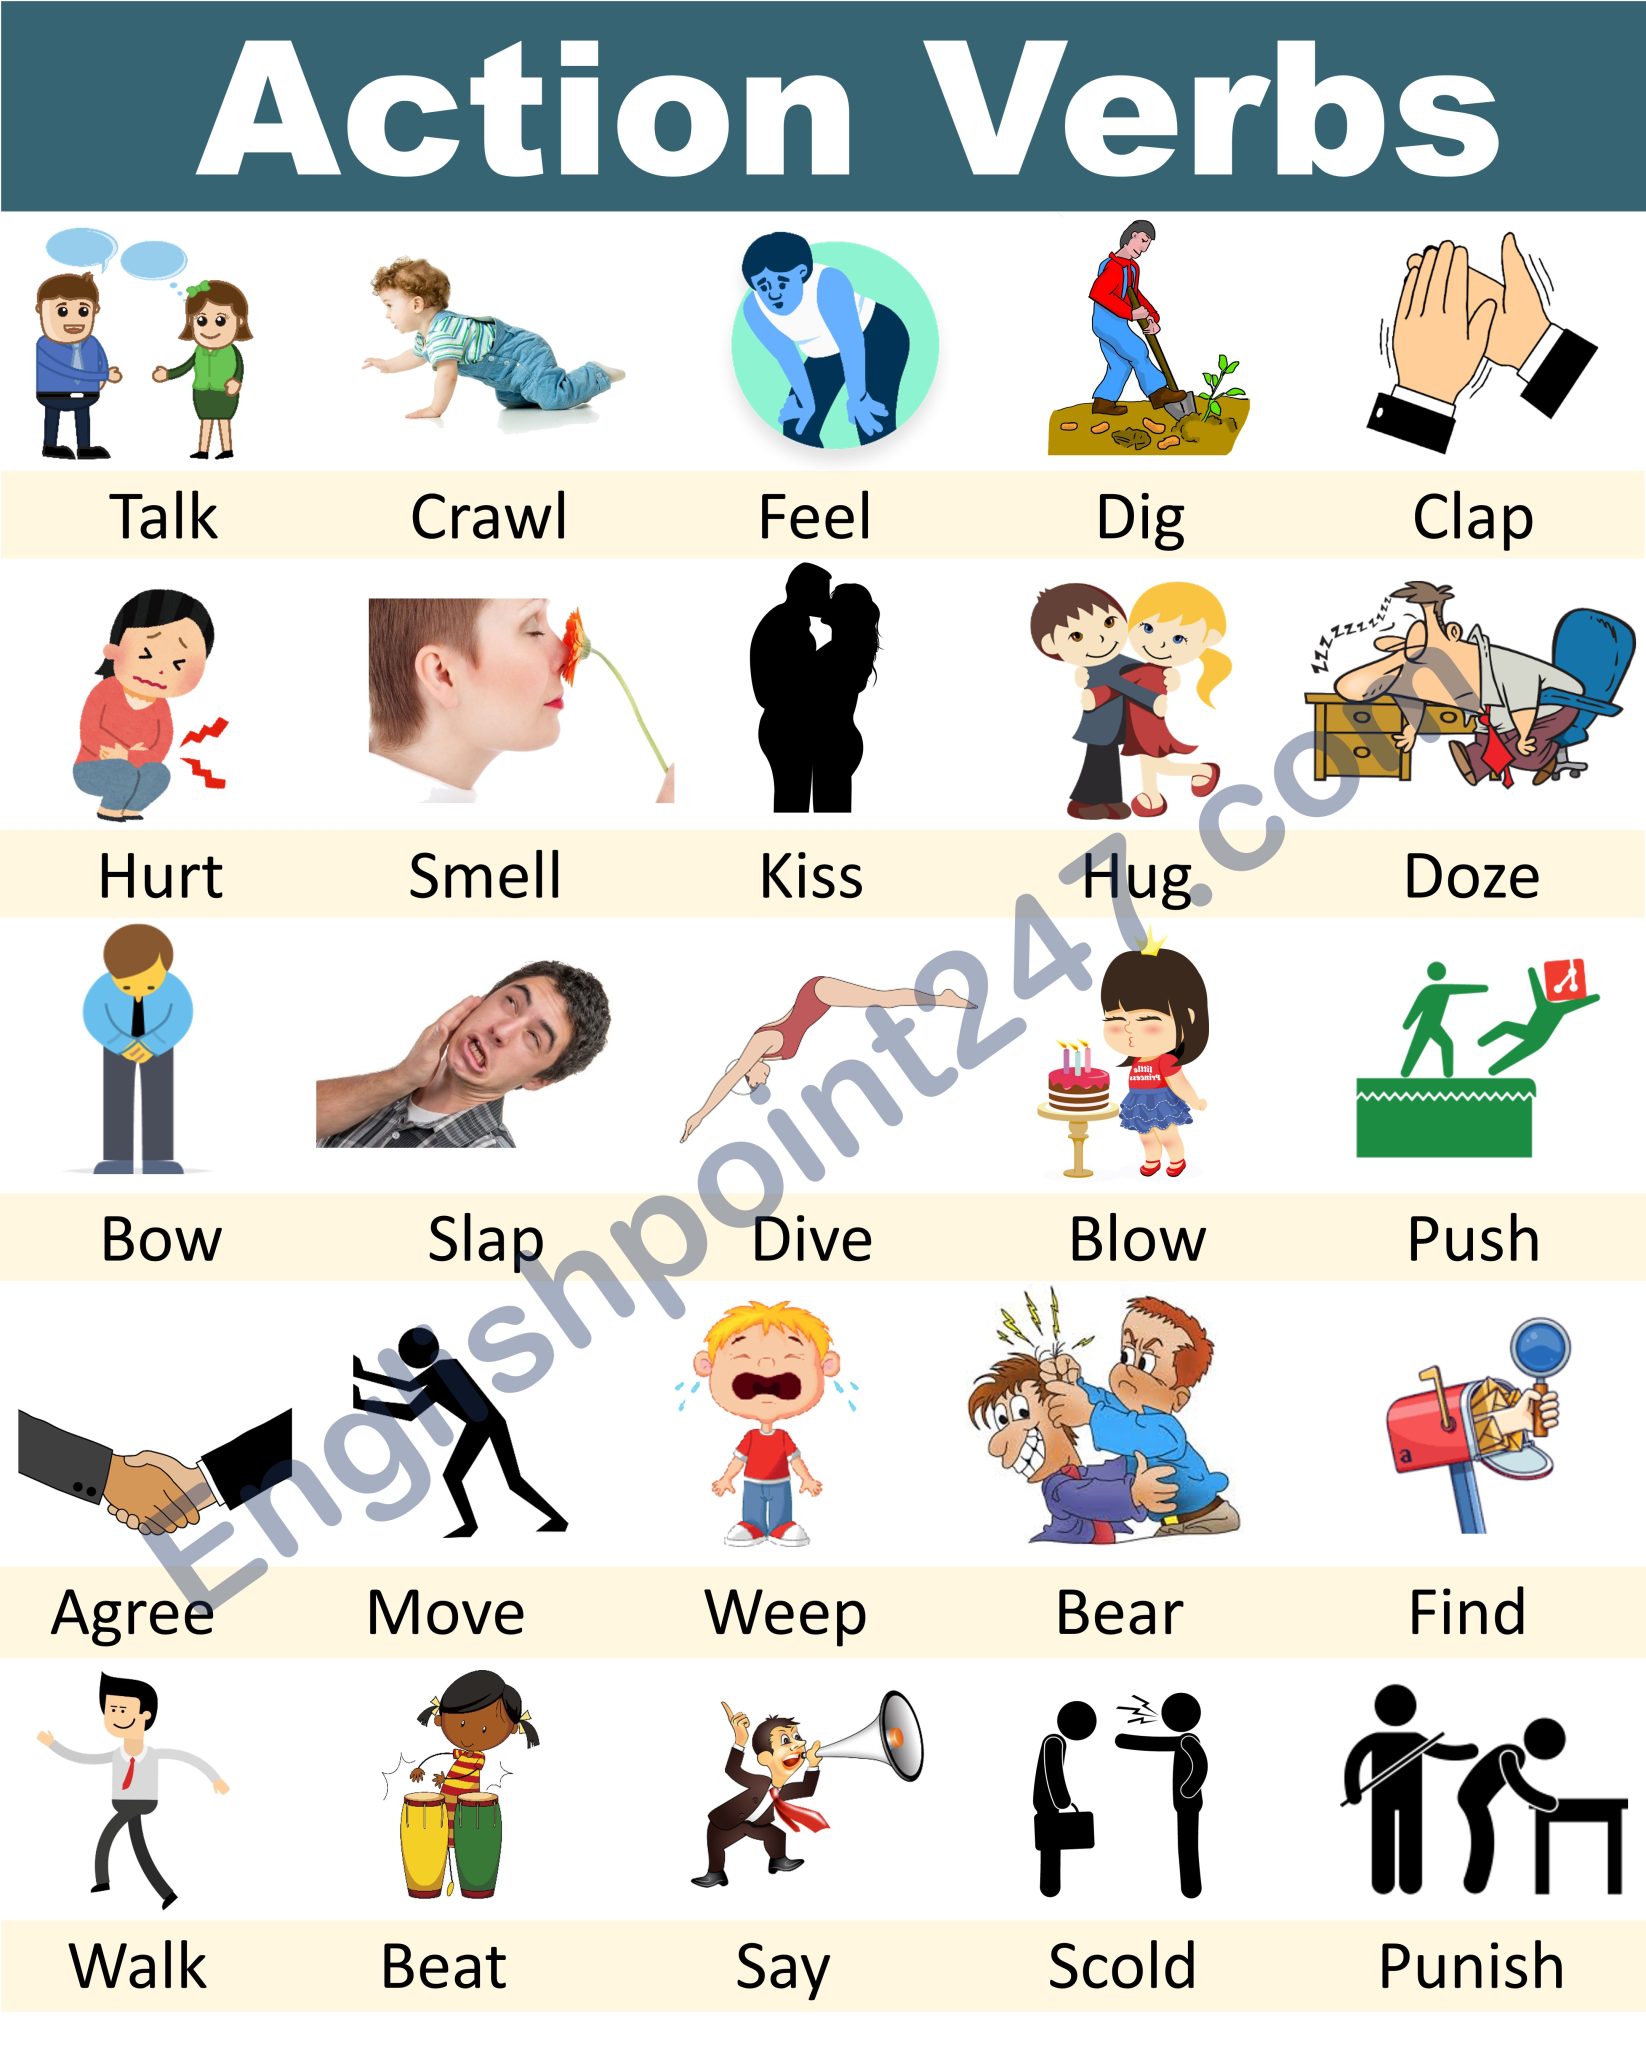 100 Action Verbs List In English With Pictures PDF EnglishPoint247